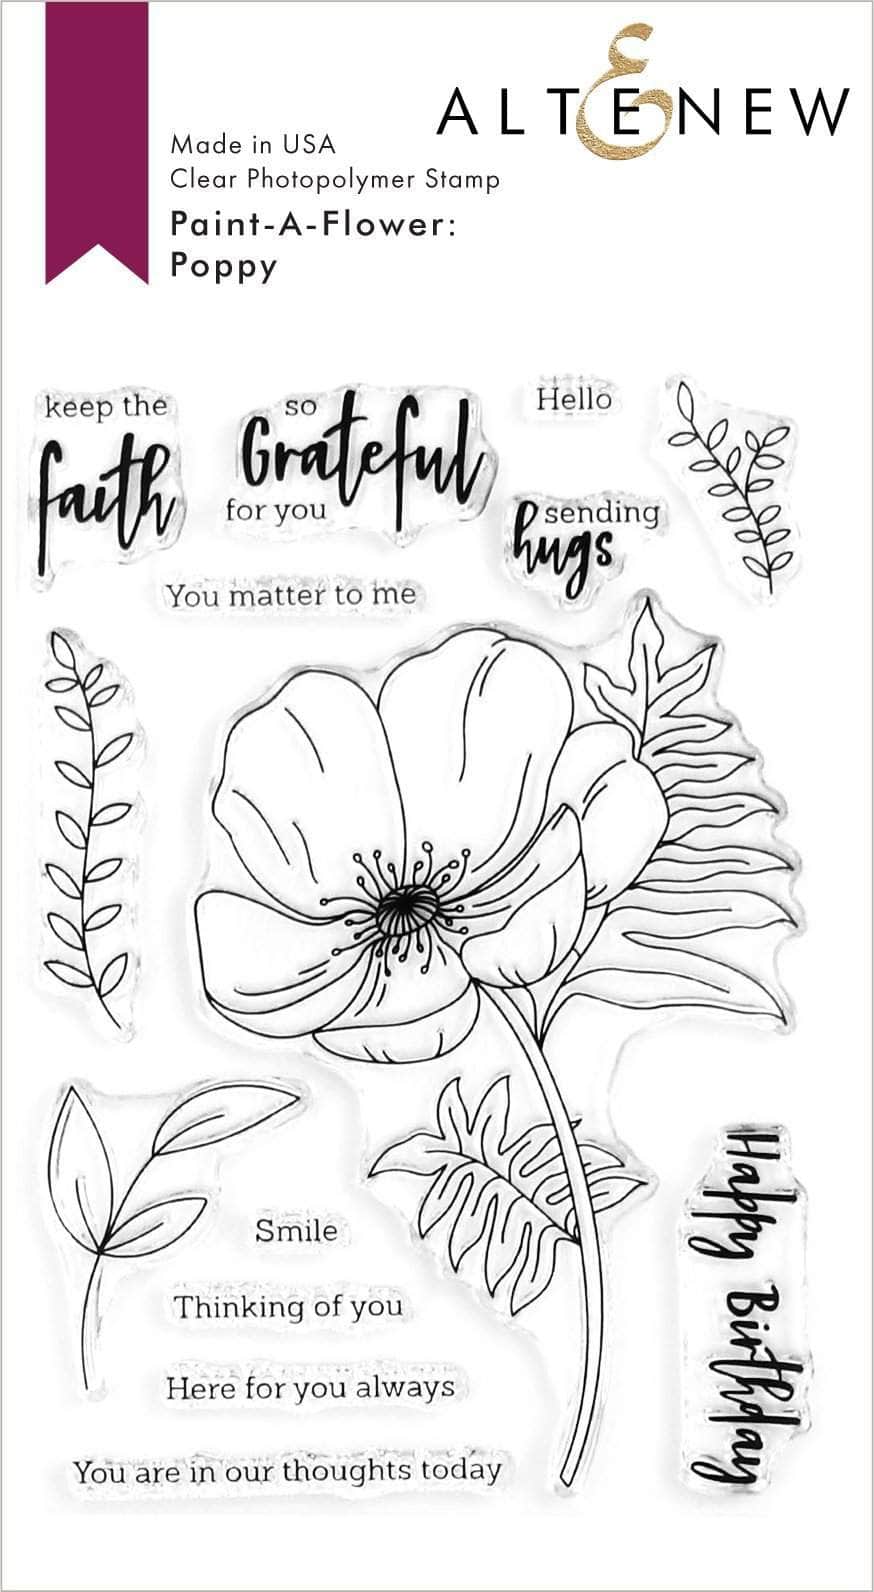 Altenew - Clear Stamps - Paint-A-Flower: China Rose Outline